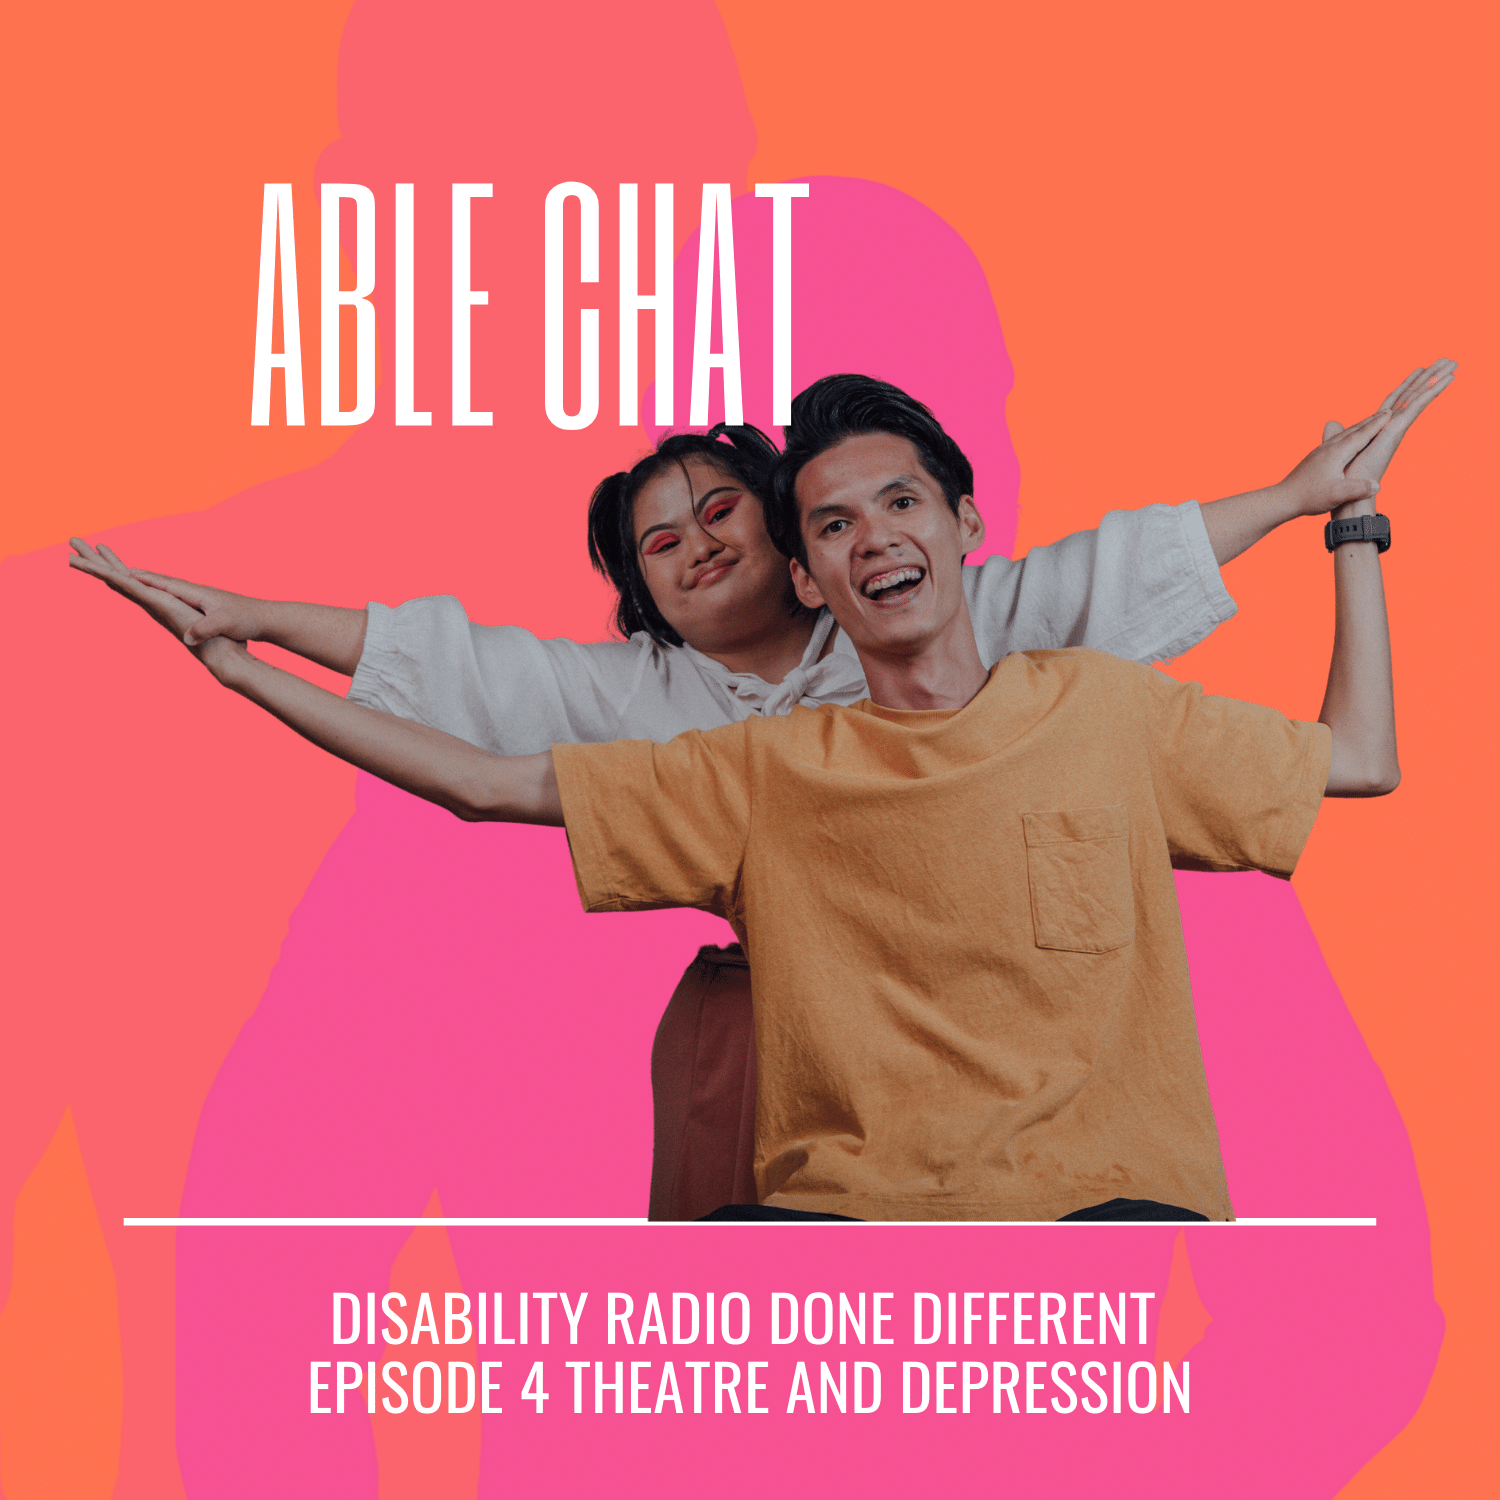 Disability Depression and Theatre on Able Chat Radio